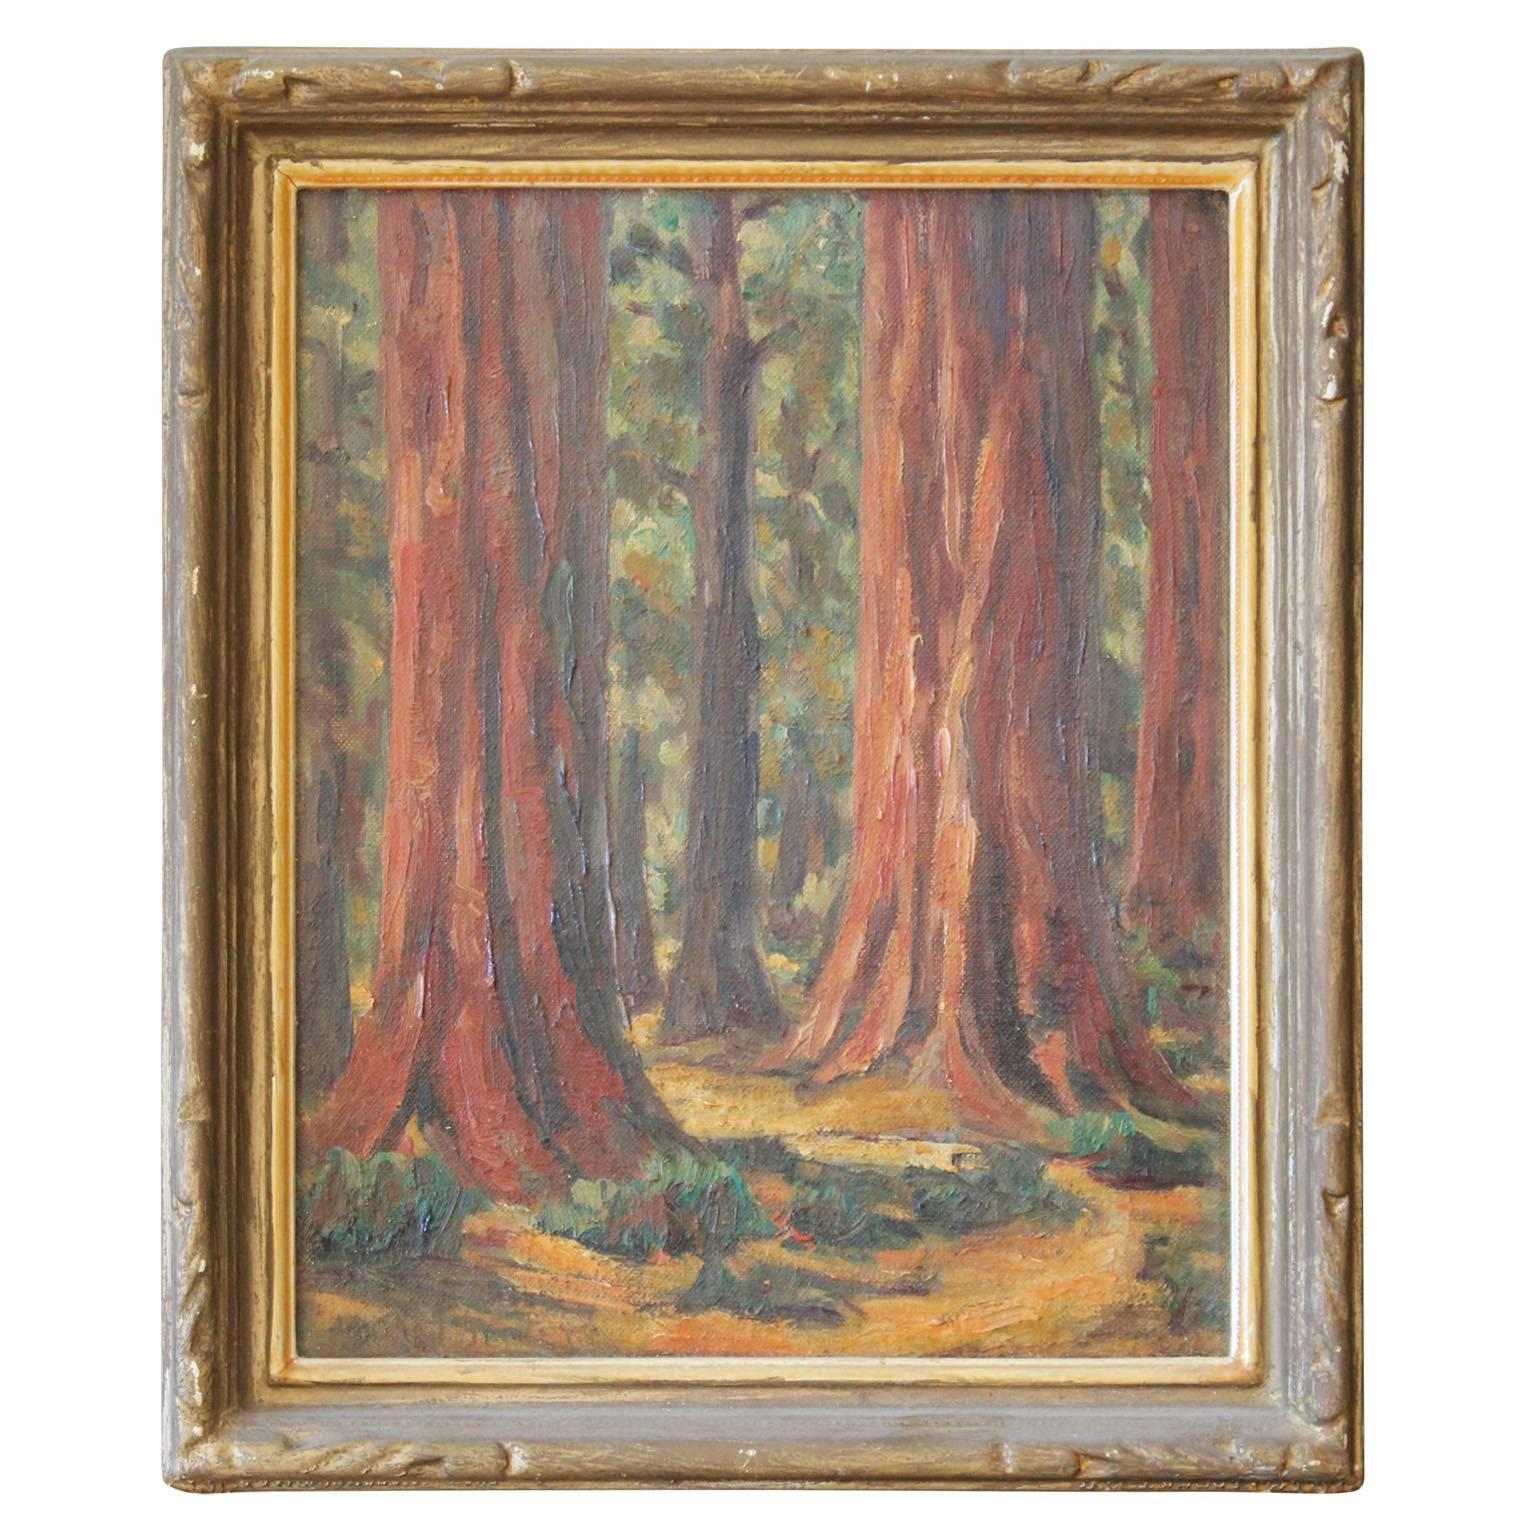 "Desert Mountain"- Early California Redwood Trees Landscape Painting - Art by Unknown